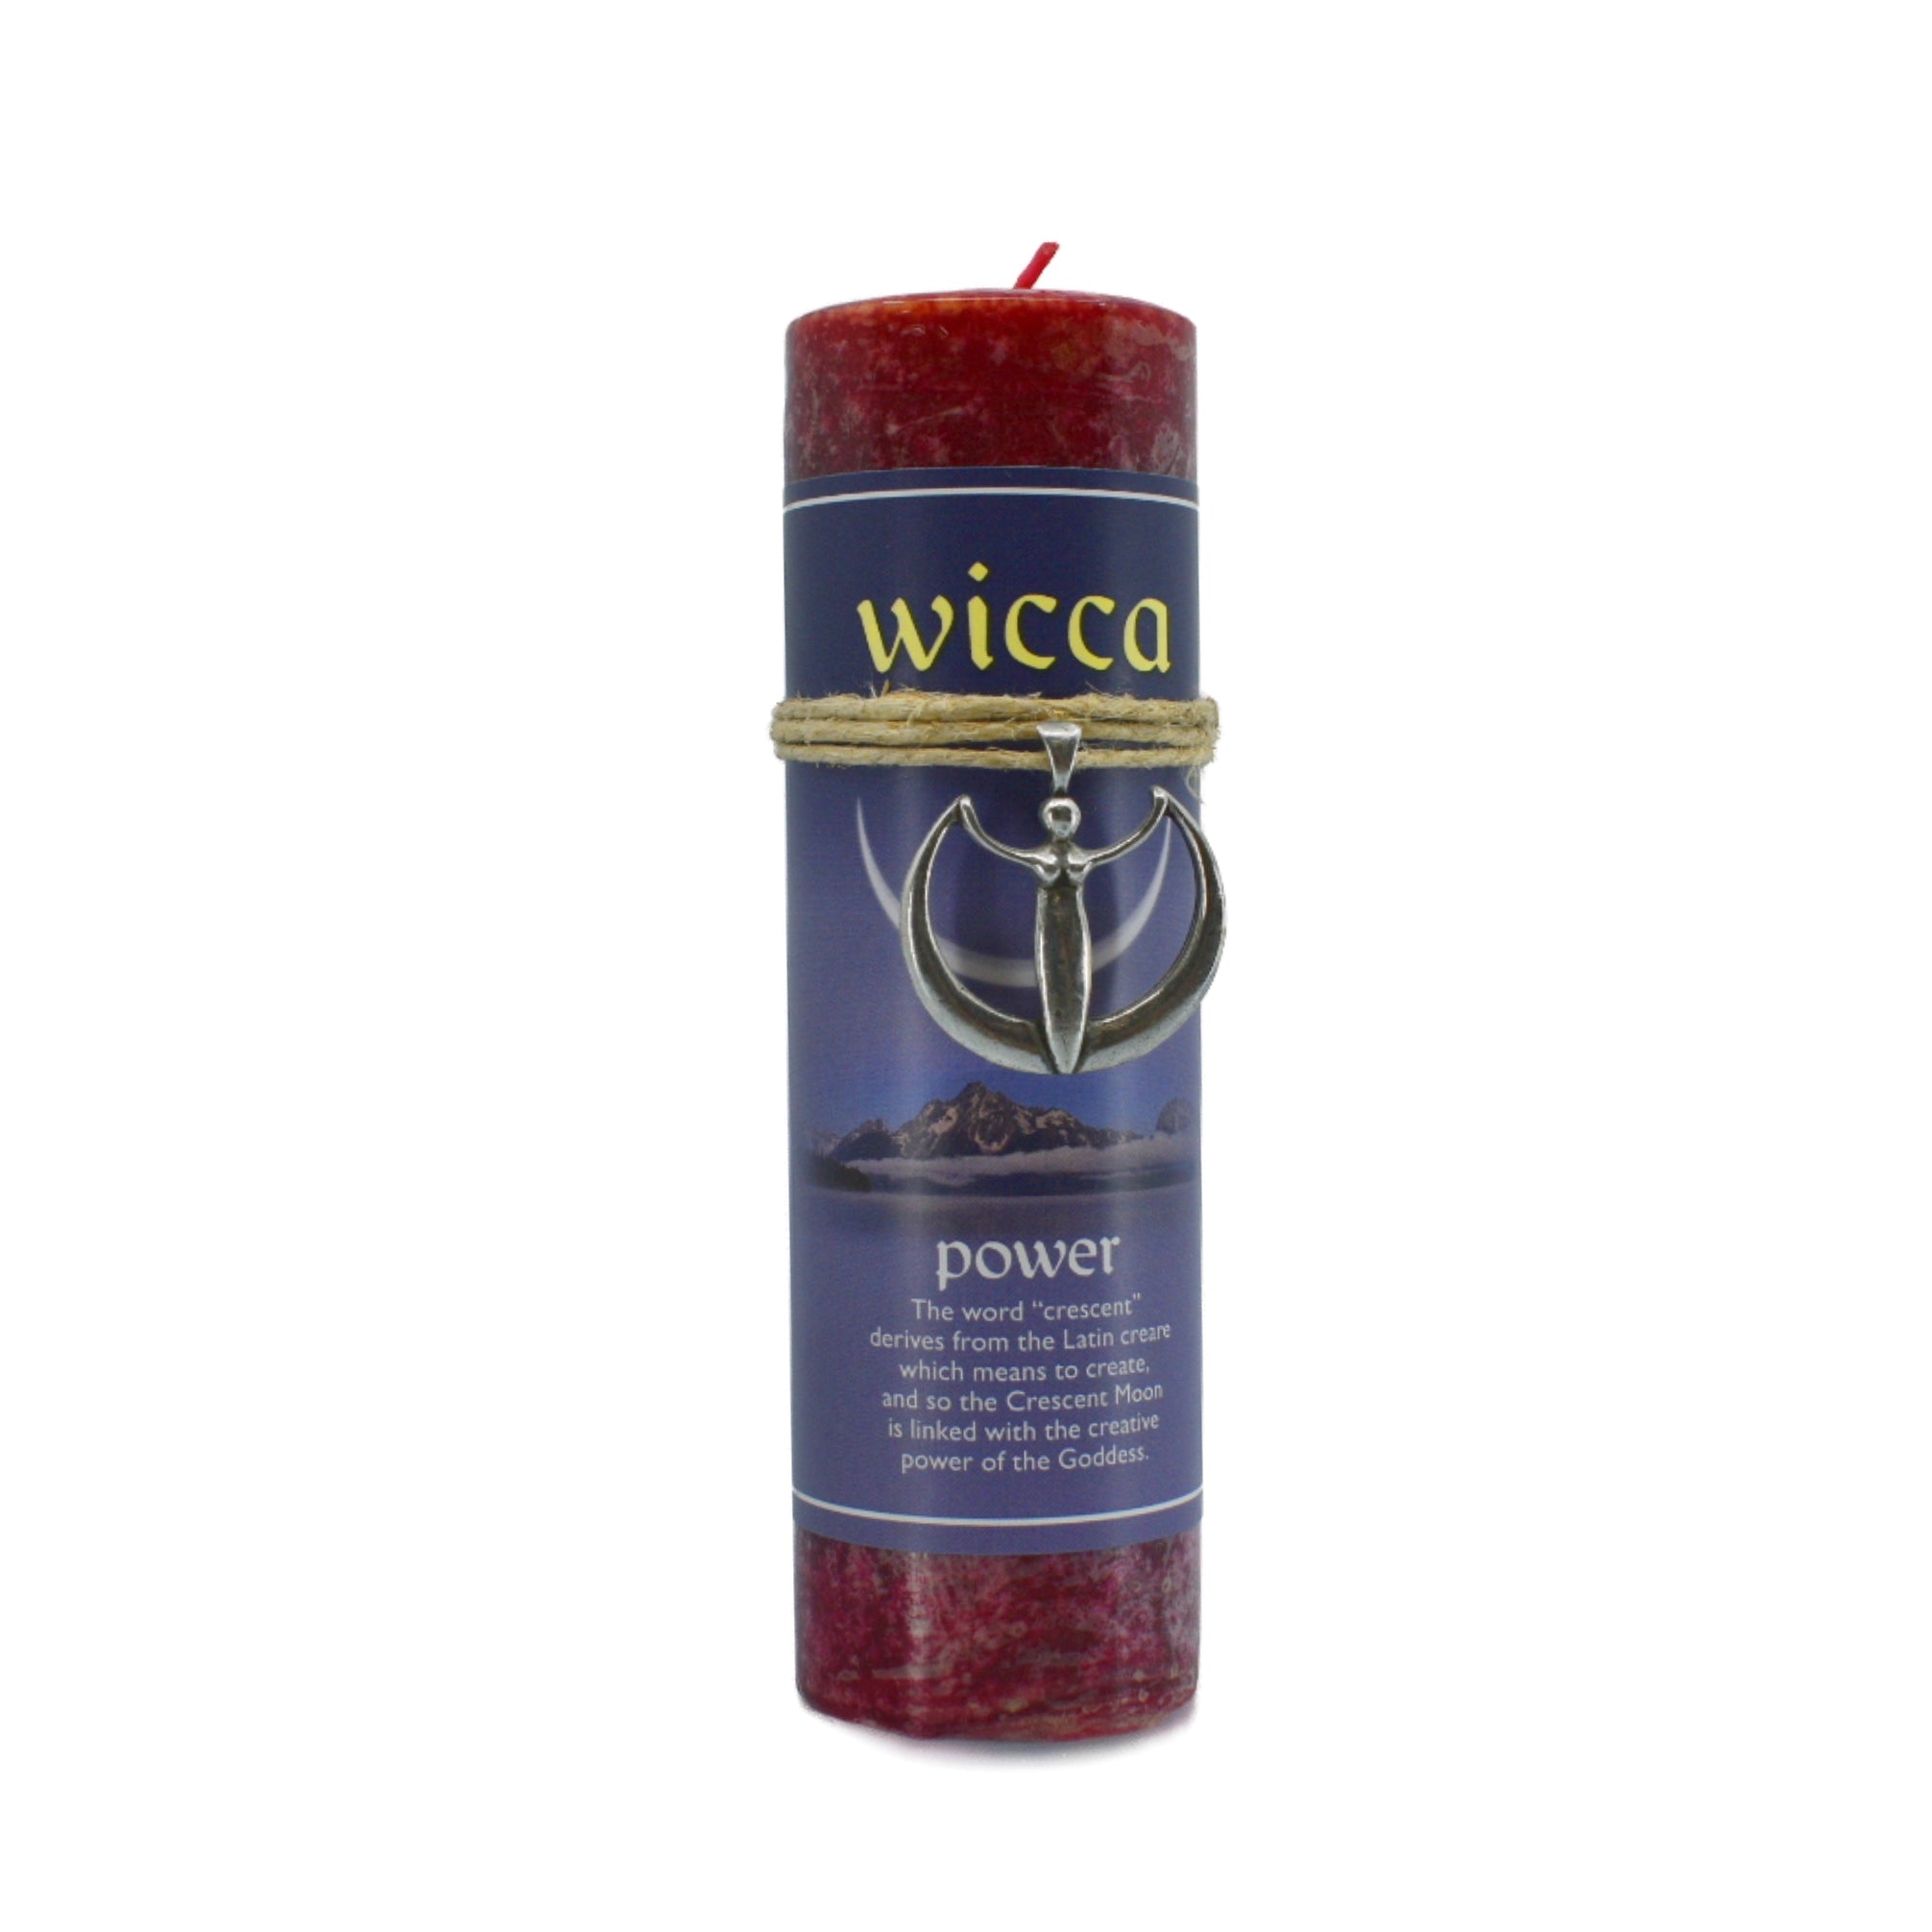 Power Wicca Pendant Candle.  The Crescent Moon is linked with the creative power of the Goddess.  This pewter pendant can be worn as a necklace.  The unscented candle is red and is 6.5&quot; high and 2&quot; in diameter.  